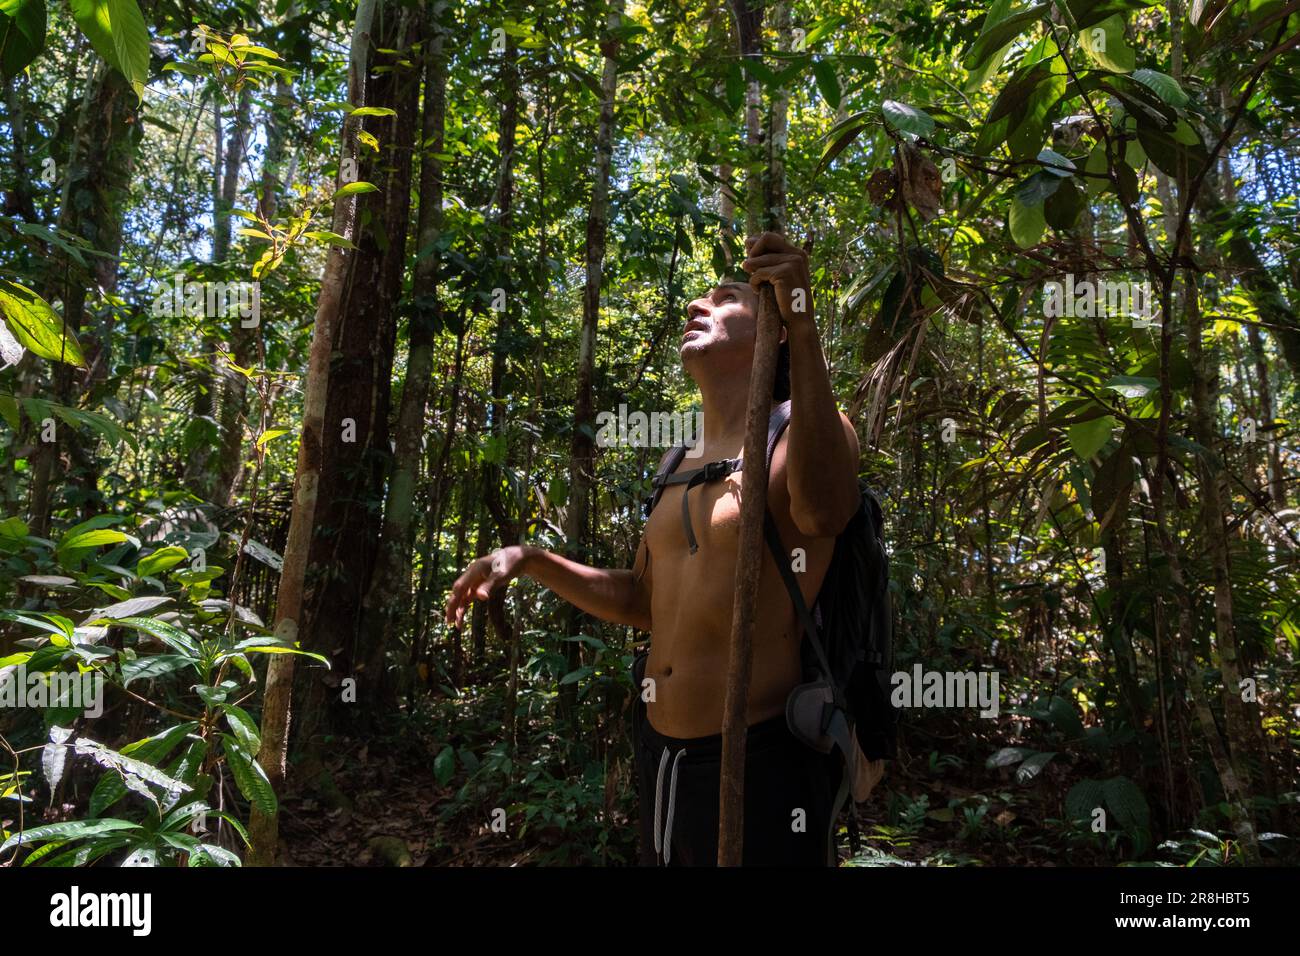 A Latin American man guide in the Amazon rainforest of Ecuador, Tena, walking and explaining things about the environment during a tour through a prim Stock Photo